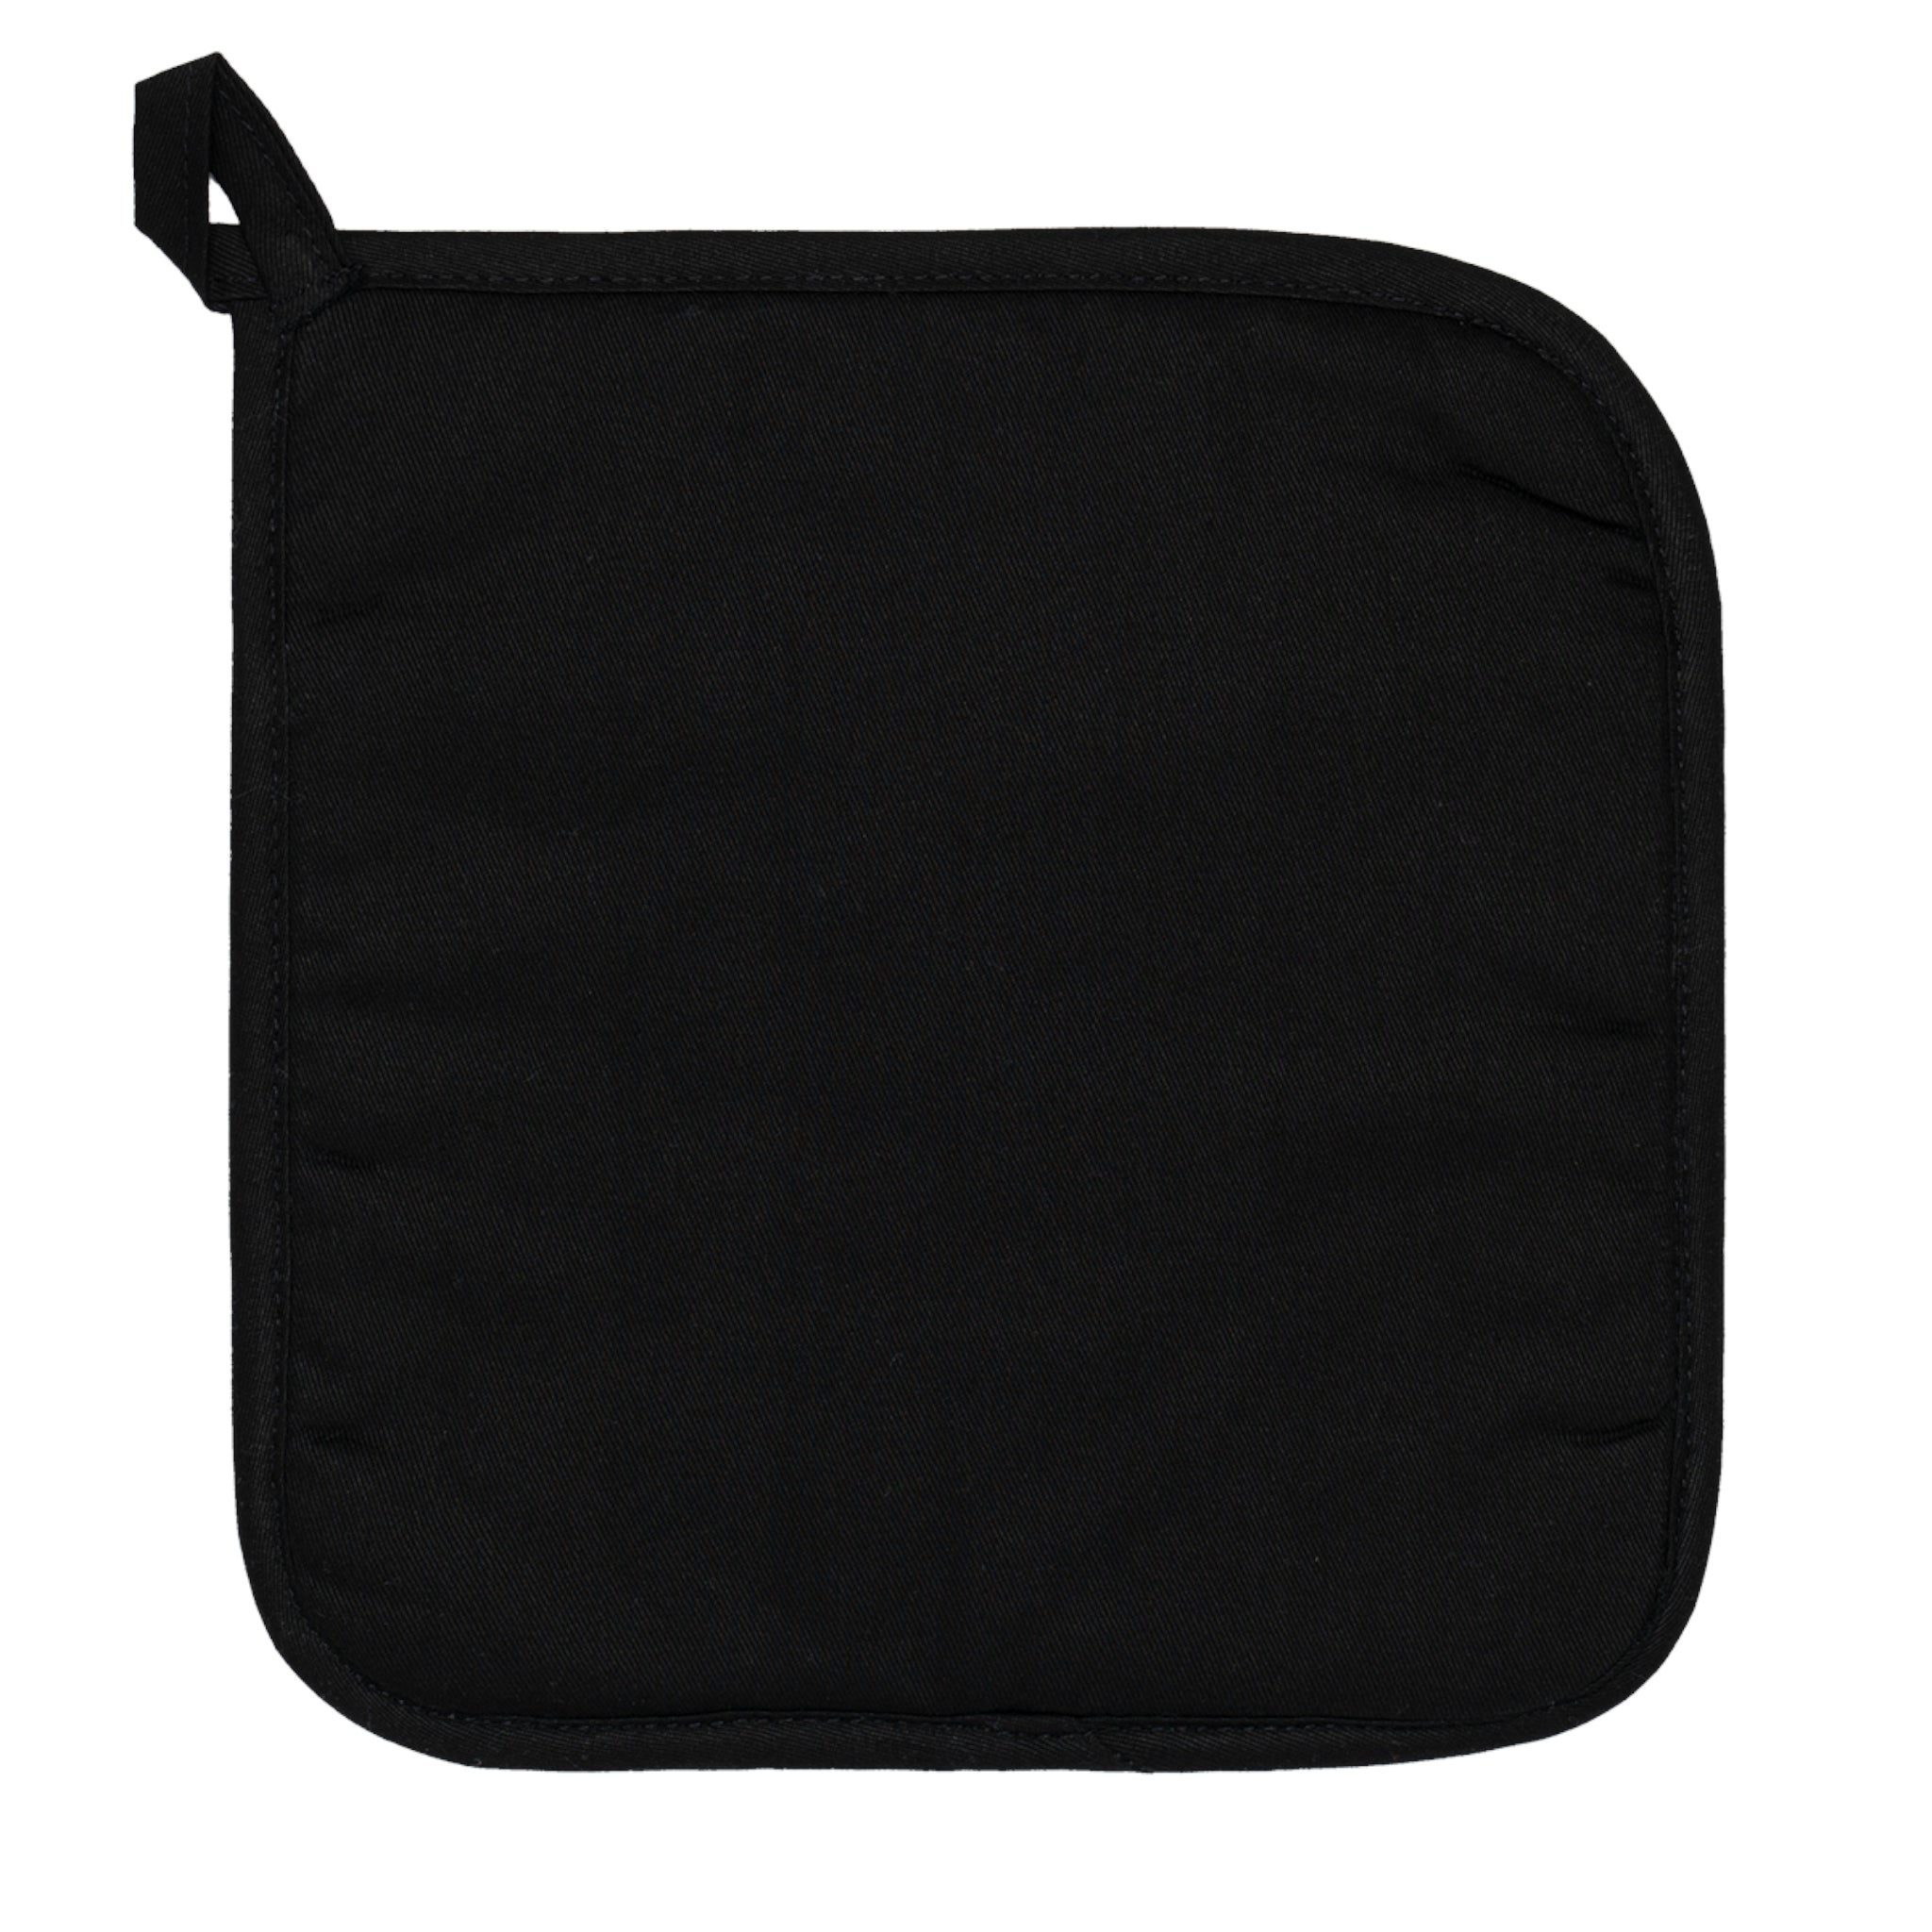 the-ultimate-online-sports-store-for-stability-aid-pot-holder-with-pocket-online-now_2.jpg